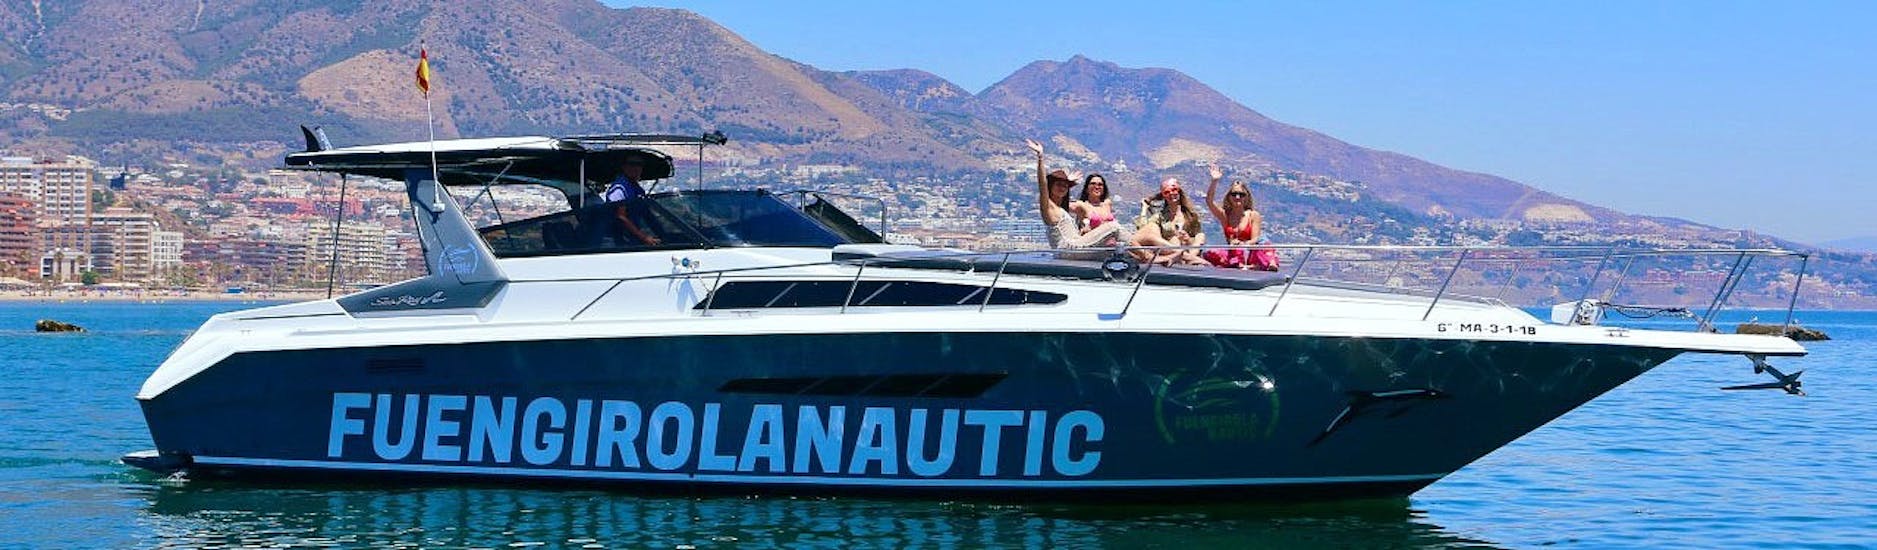 Picture of our boat during a Yacht Rental in Fuengirola (up to 12 people) with Fuengirolanautic.